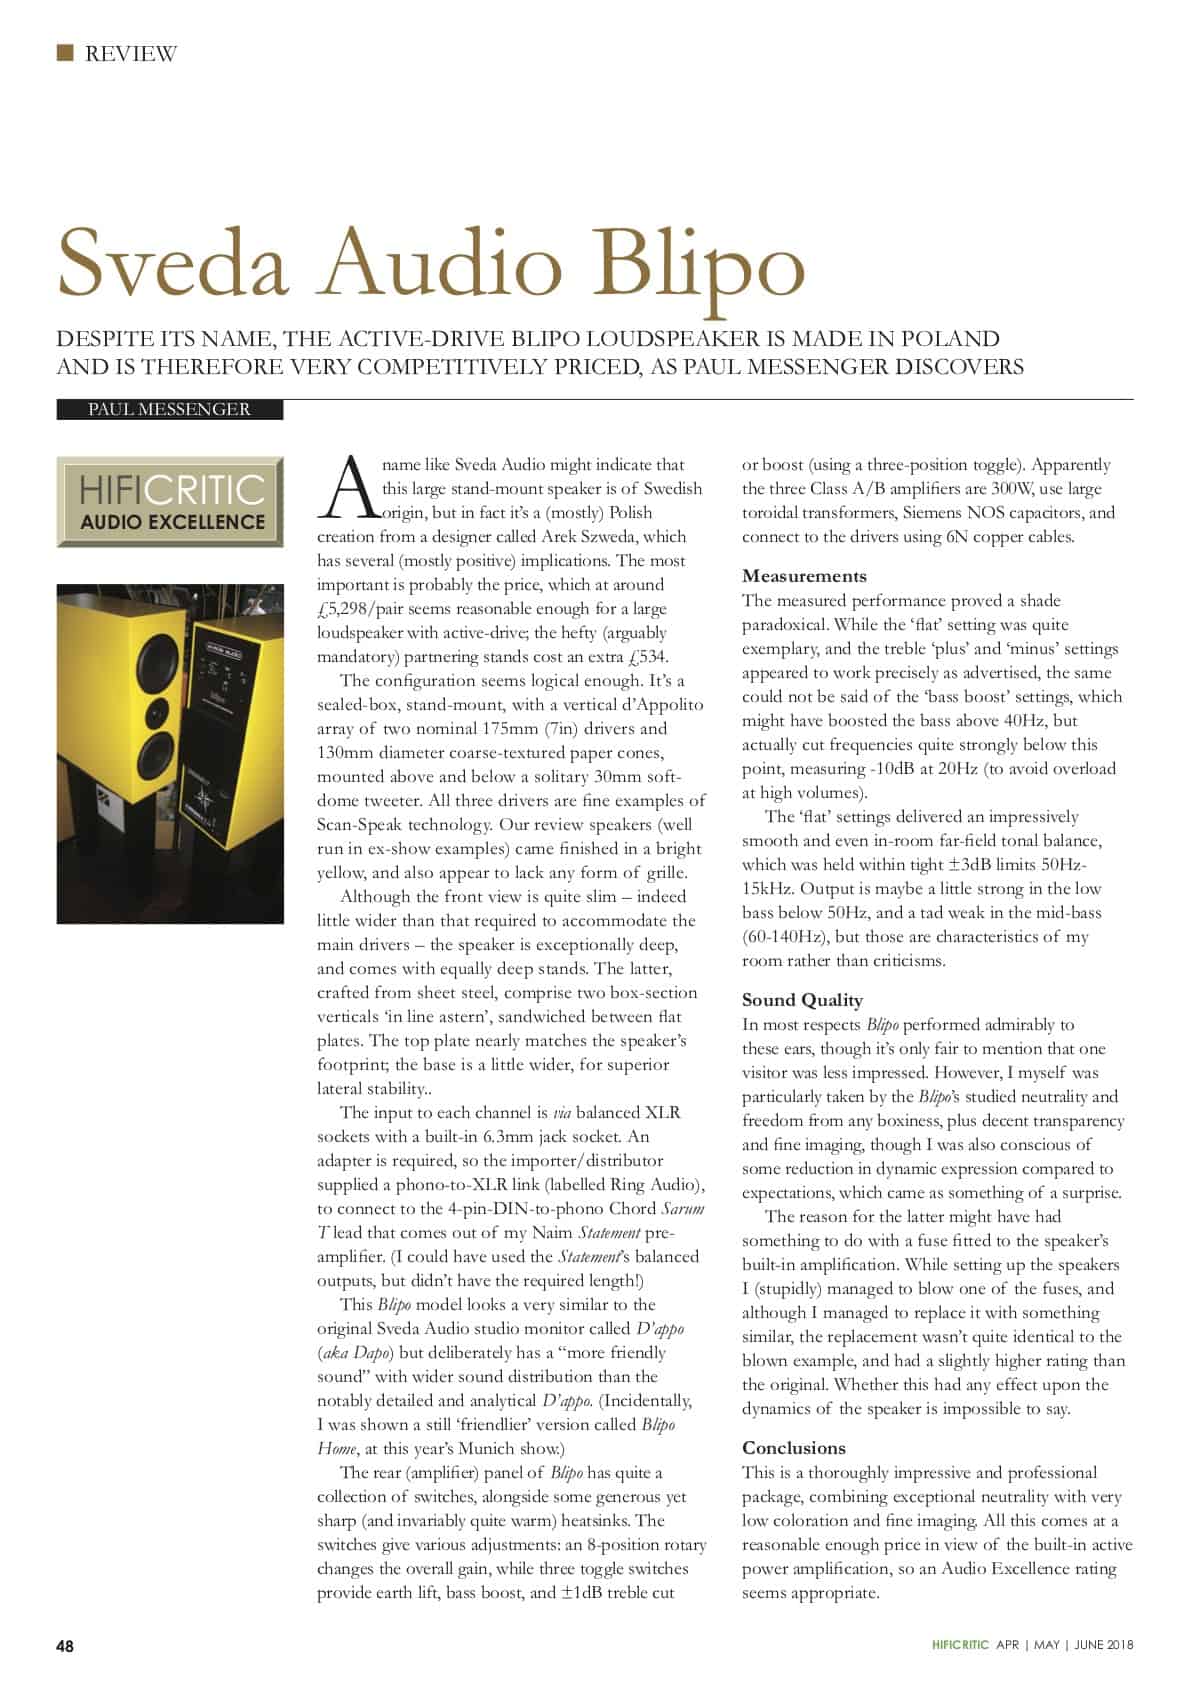 Excerpt-201806-5-Review-Sveda Audio Blipo Audio Excellence-pdfimg